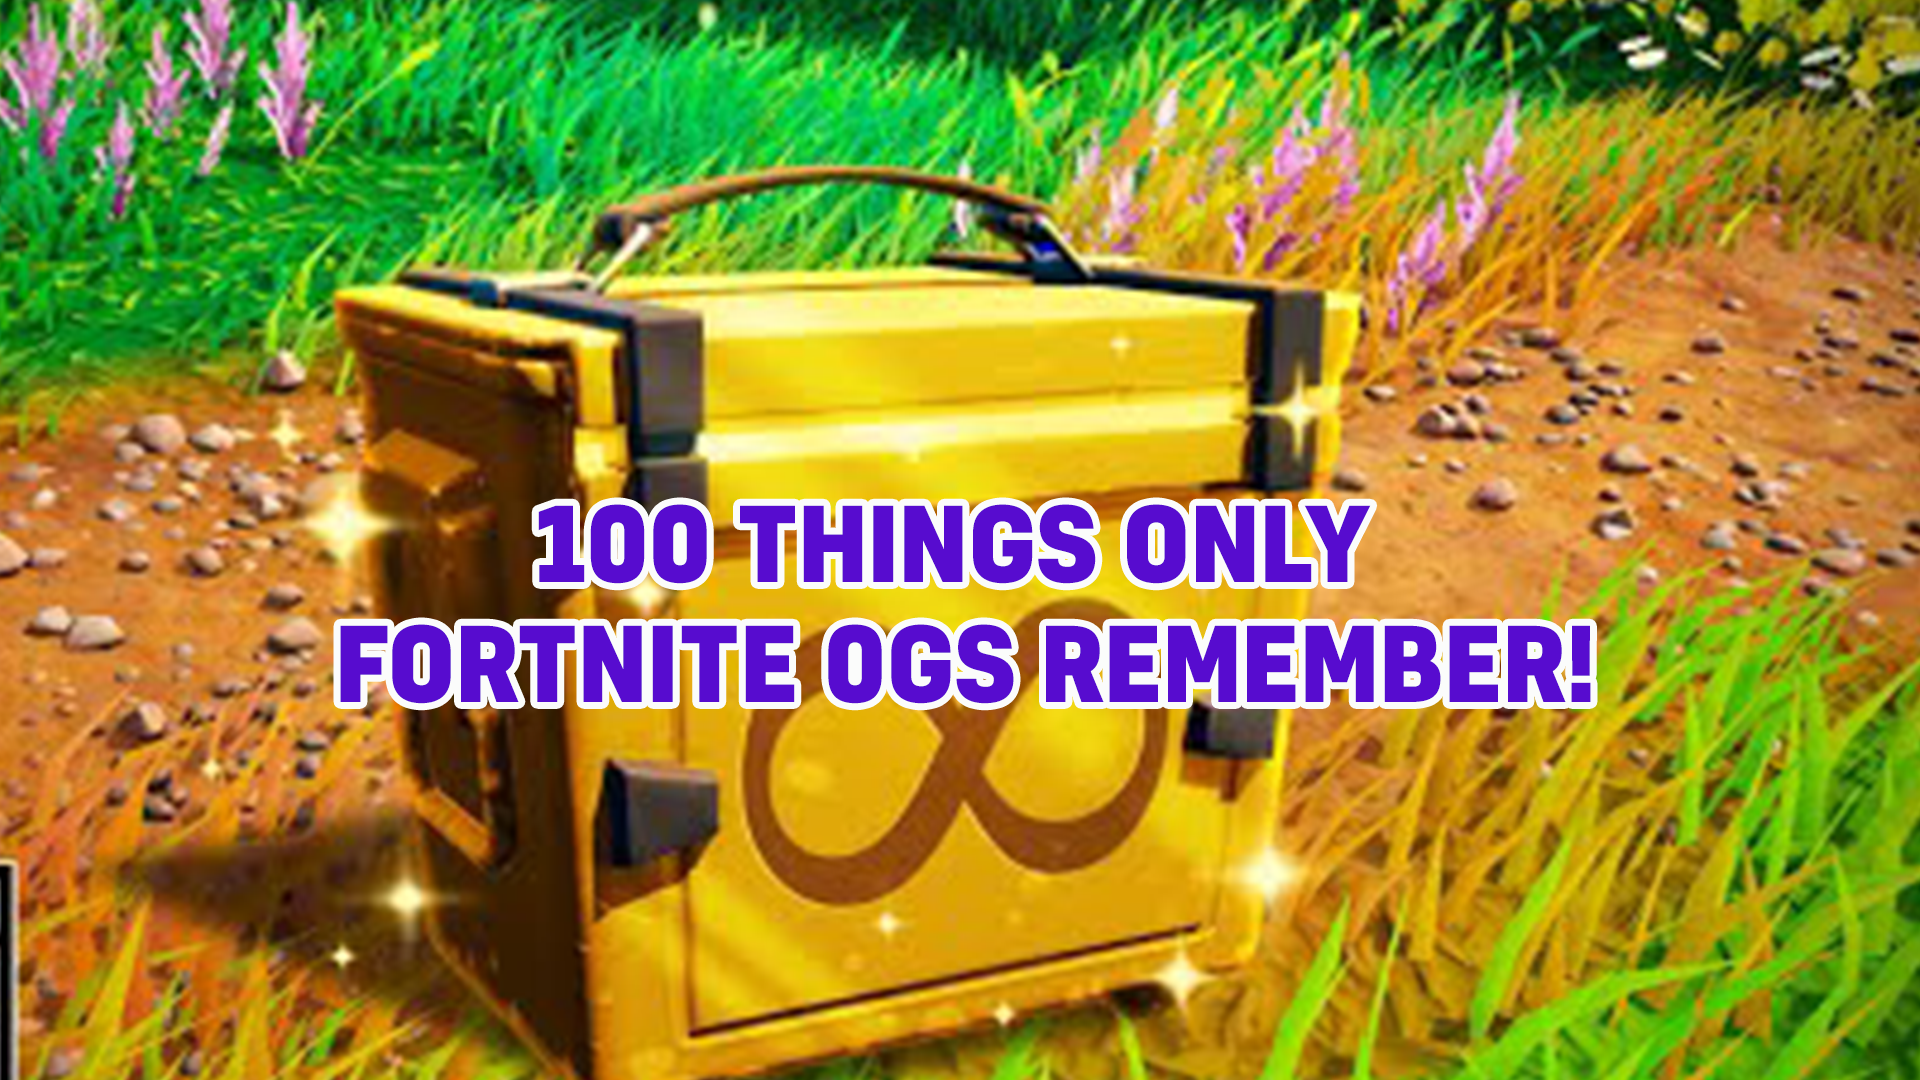 100 Things Only Fortnite OGs Remember!